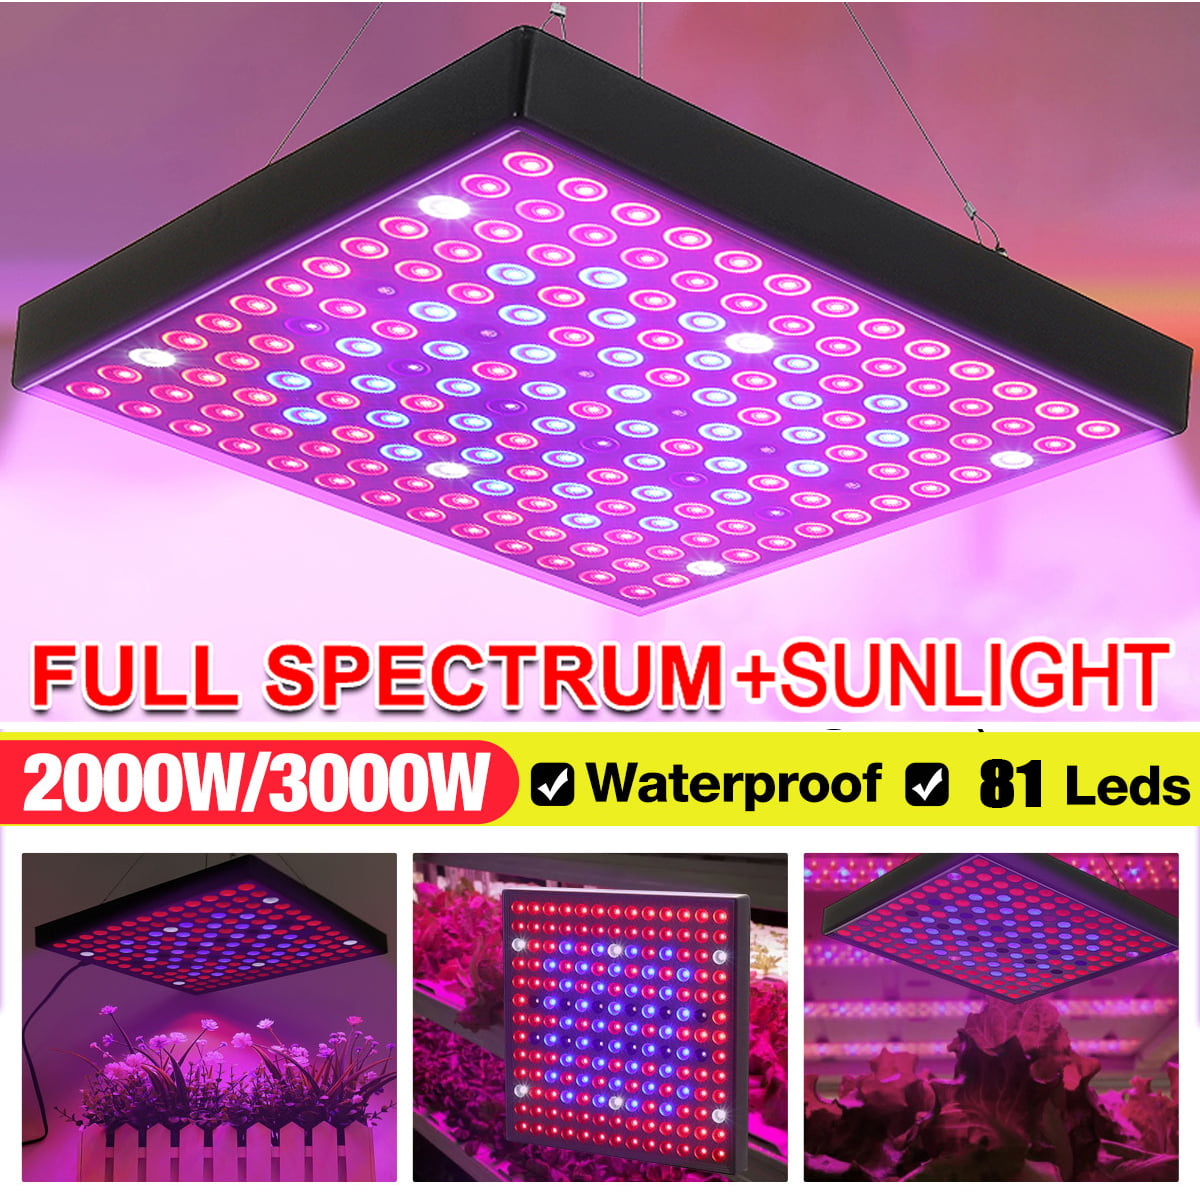 Details about   Grozy 1000W 2000W 3000W LED Grow Lights Full Spectrum For Hydroponics Grow Tent 